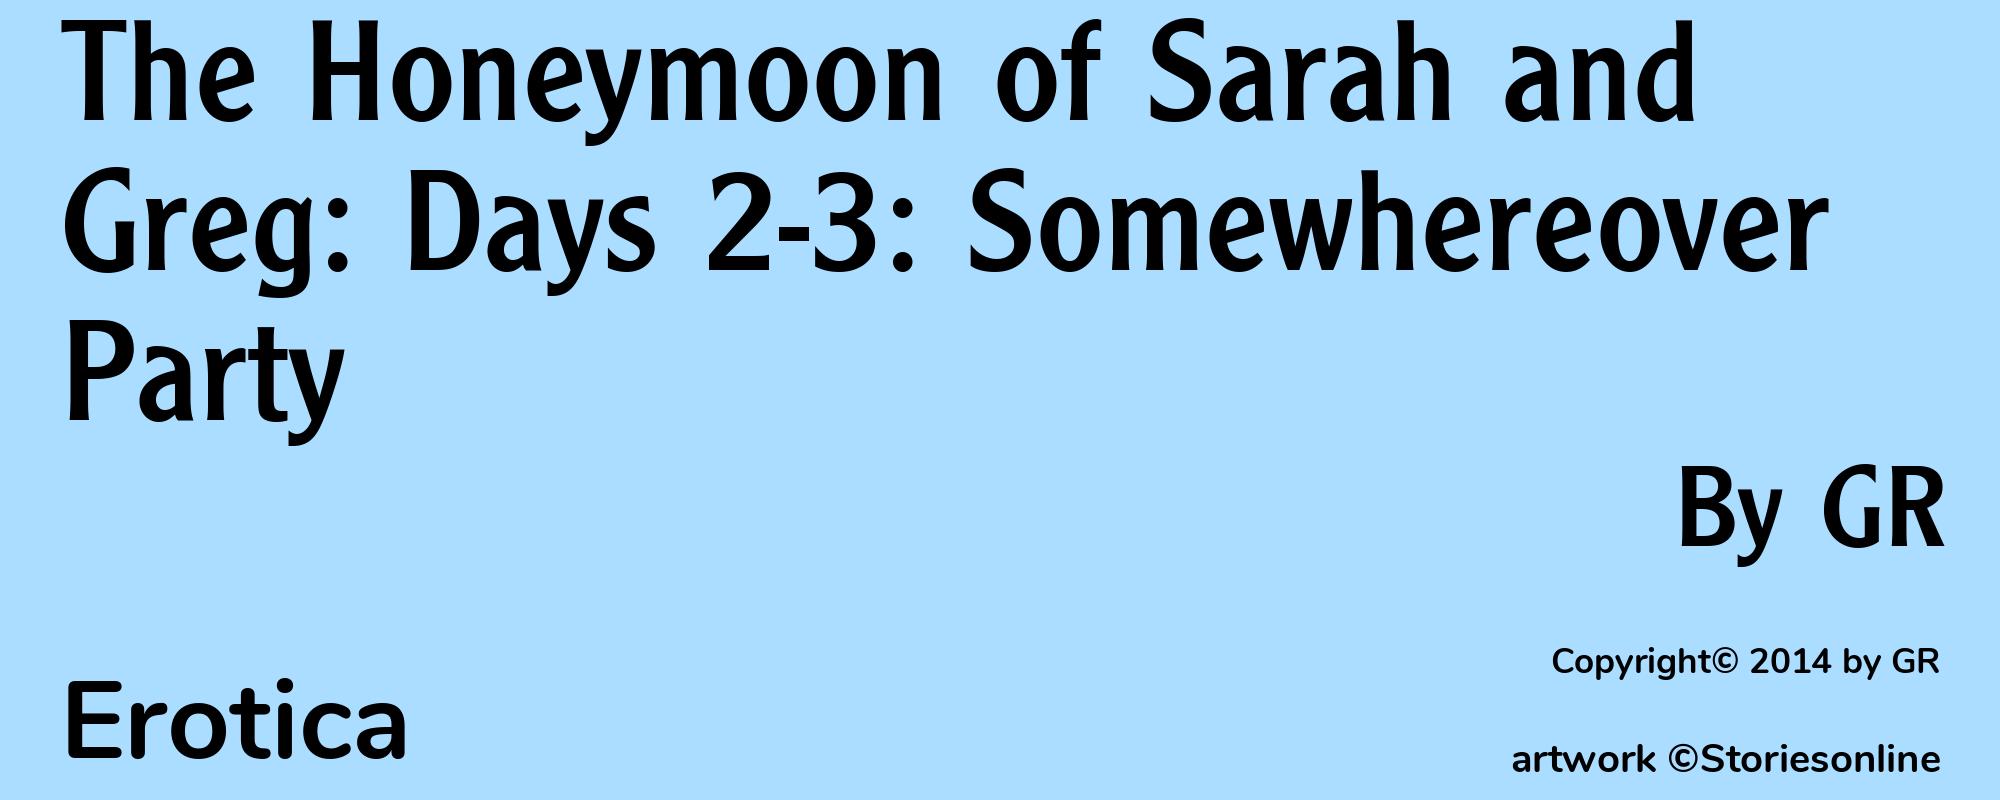 The Honeymoon of Sarah and Greg: Days 2-3: Somewhereover Party - Cover